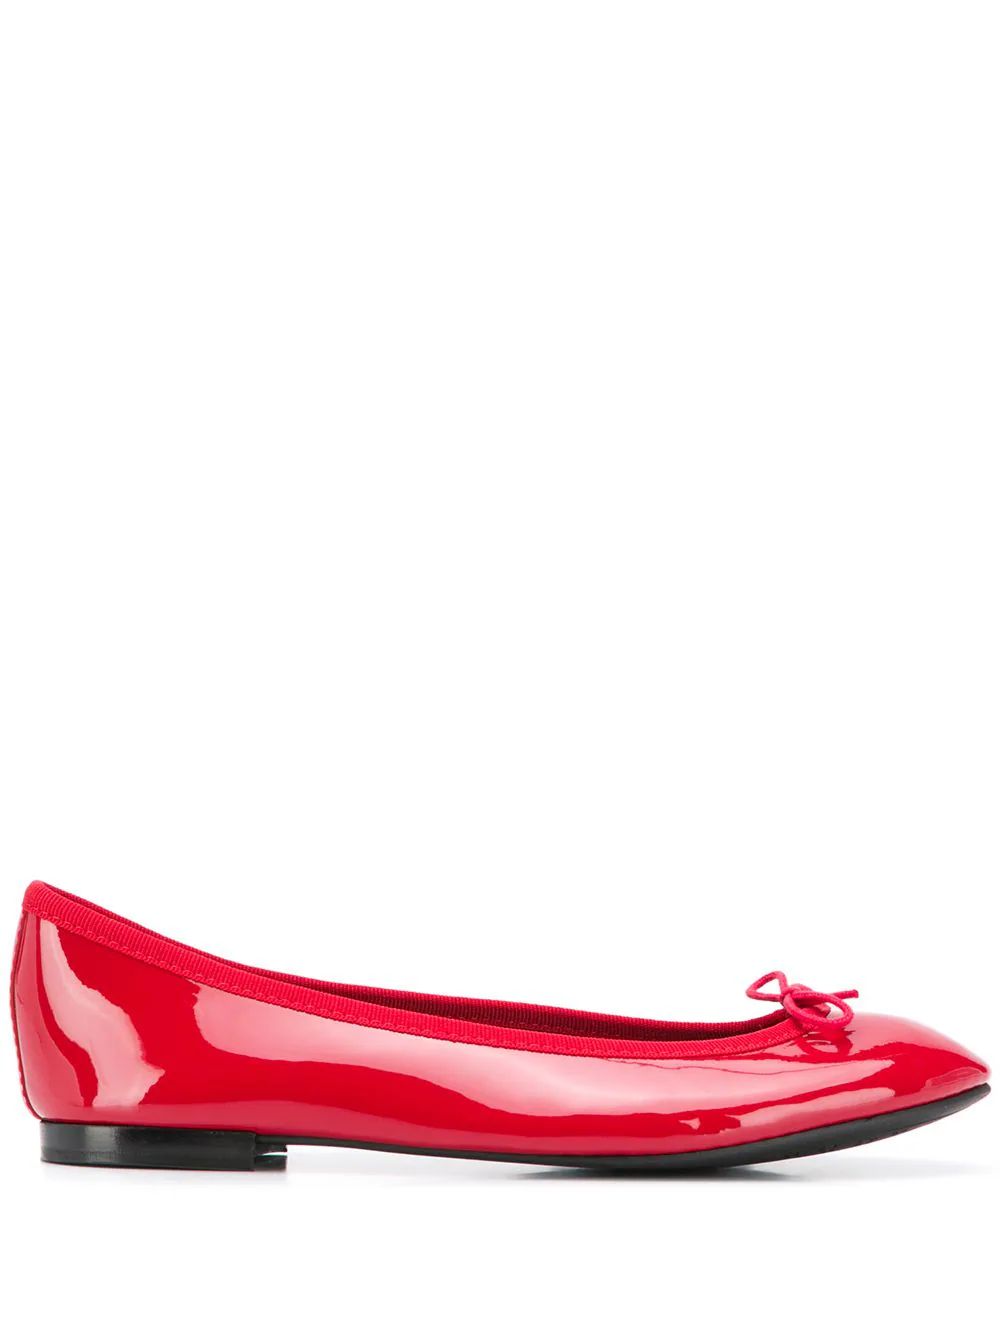 Repetto bow-embellished Ballerina Shoes - Farfetch | Farfetch Global